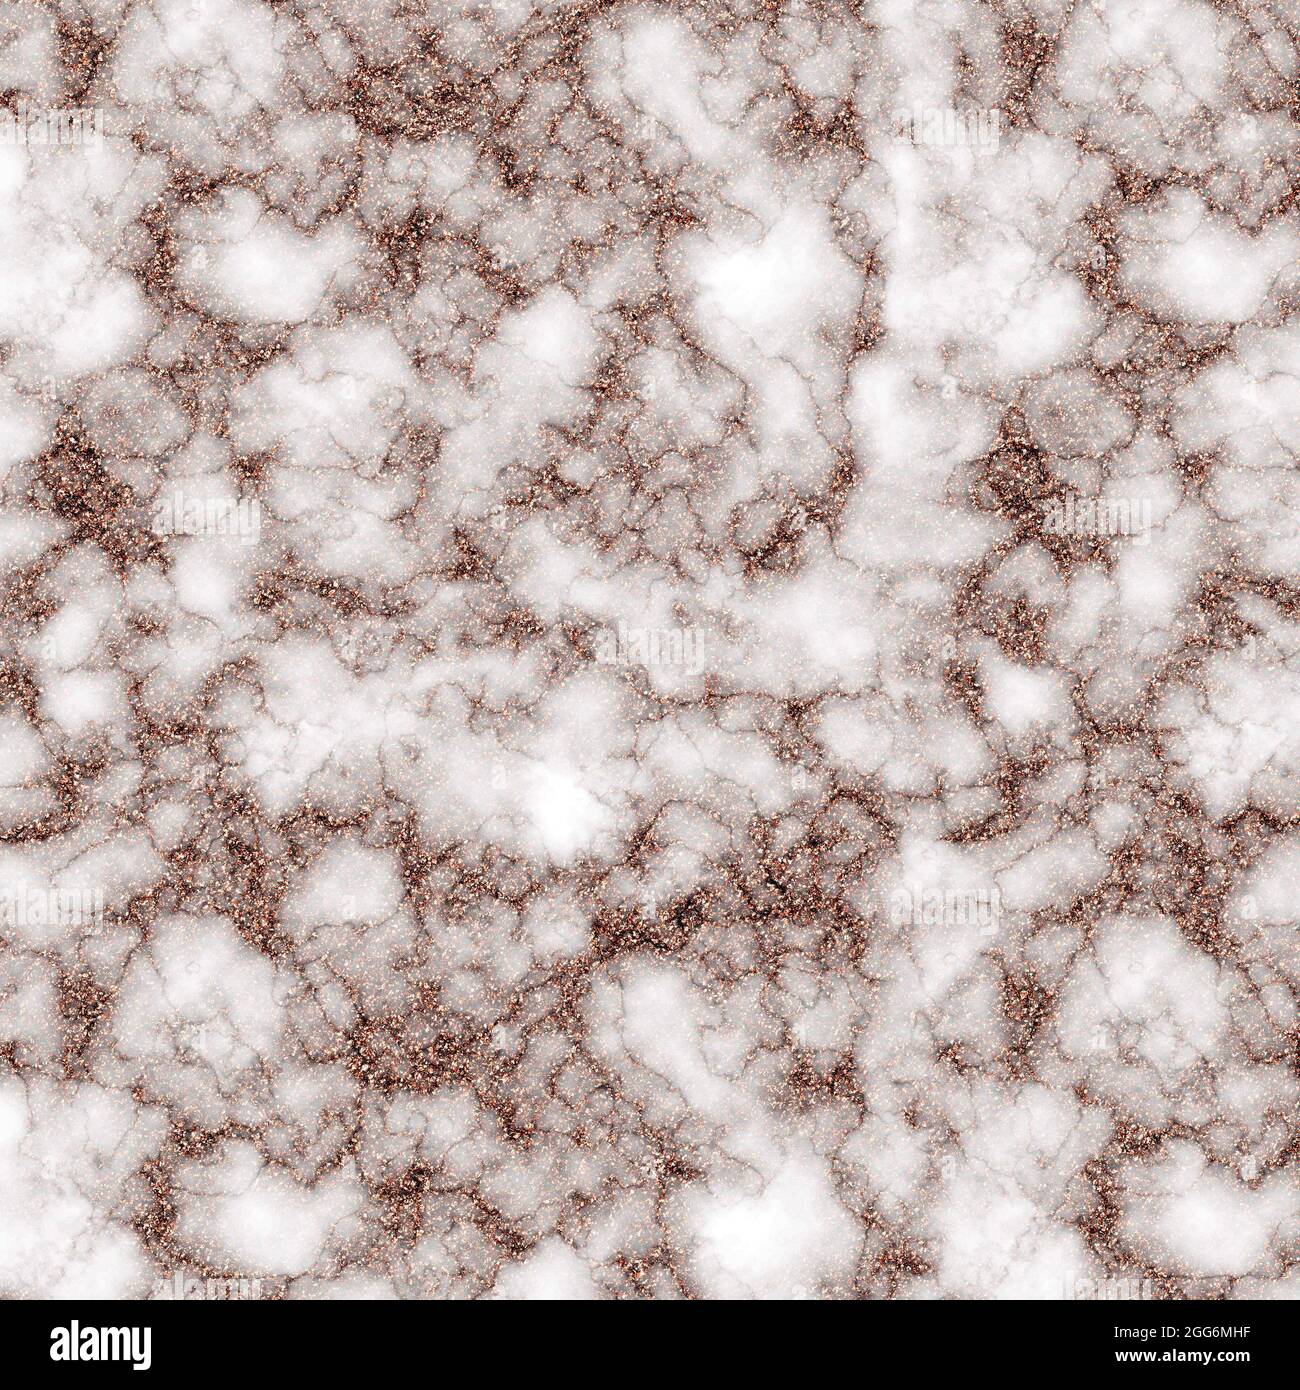 This is a marble style background or wallpaper created in rose gold tones and sparkles Stock Photo